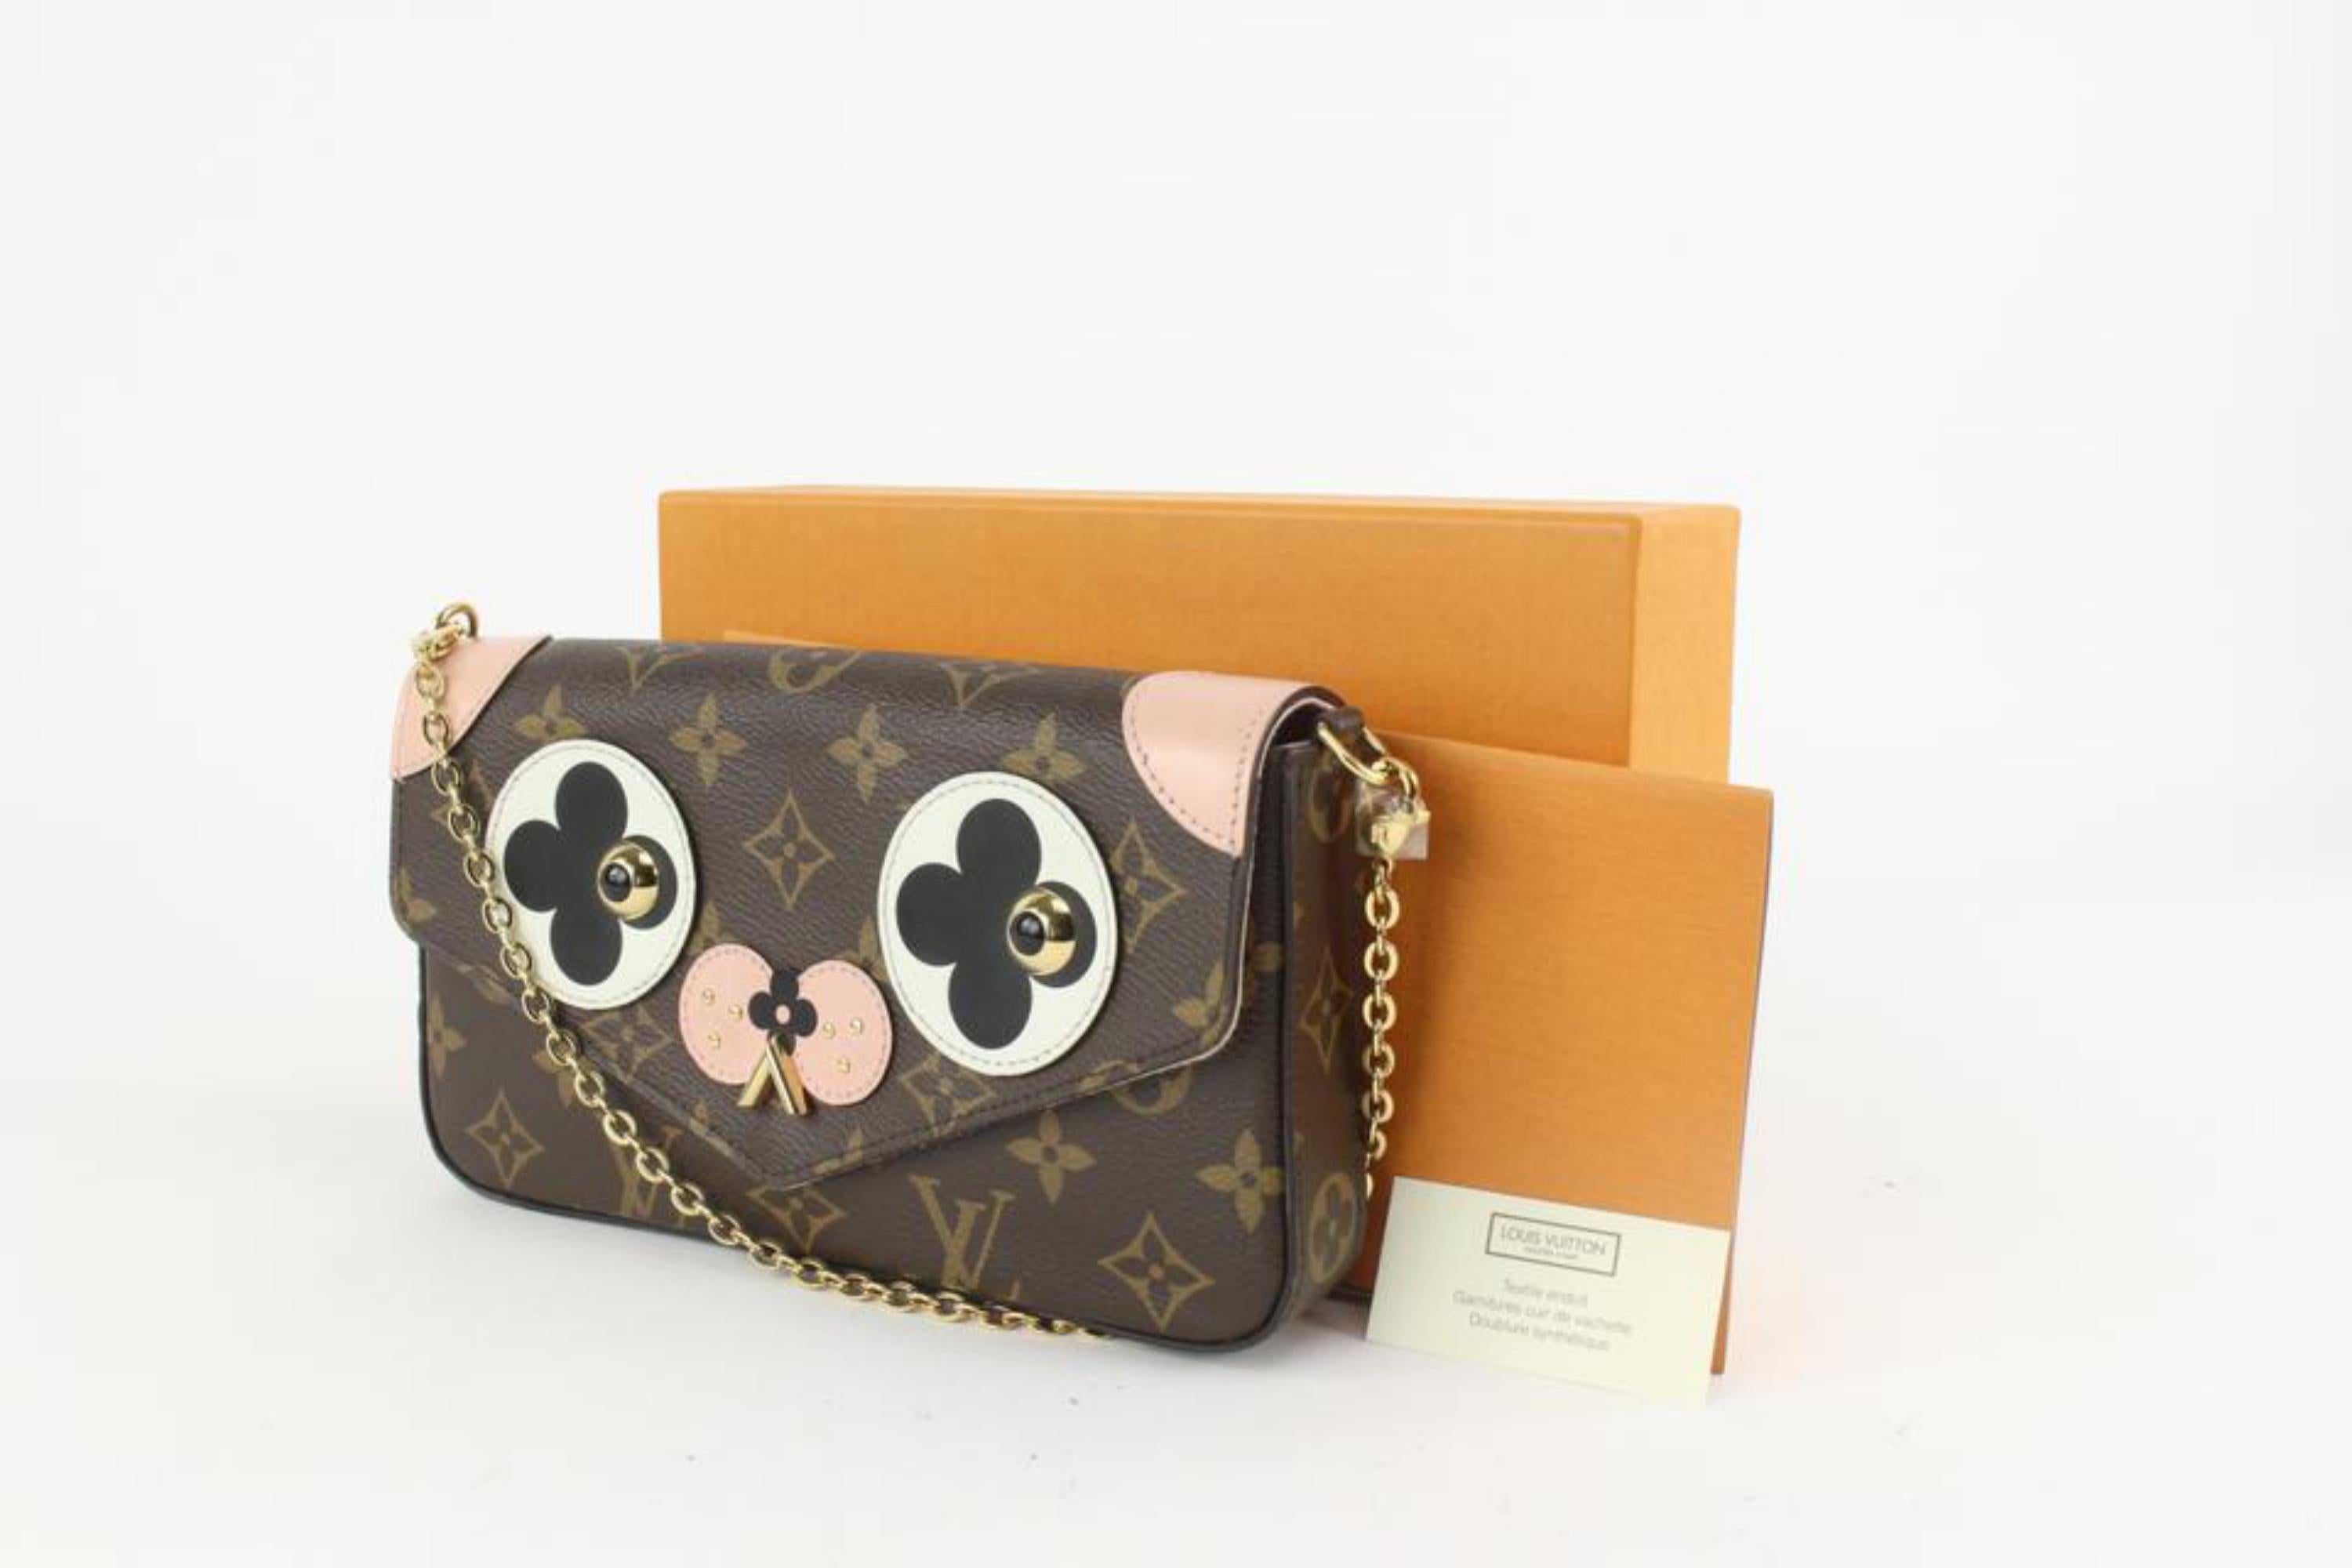 Louis Vuitton Monogram Pink Dog Pochette Felicie Crossbody 1217lv24
Date Code/Serial Number: TJ4167
Made In: France
Measurements: Length:  8.2